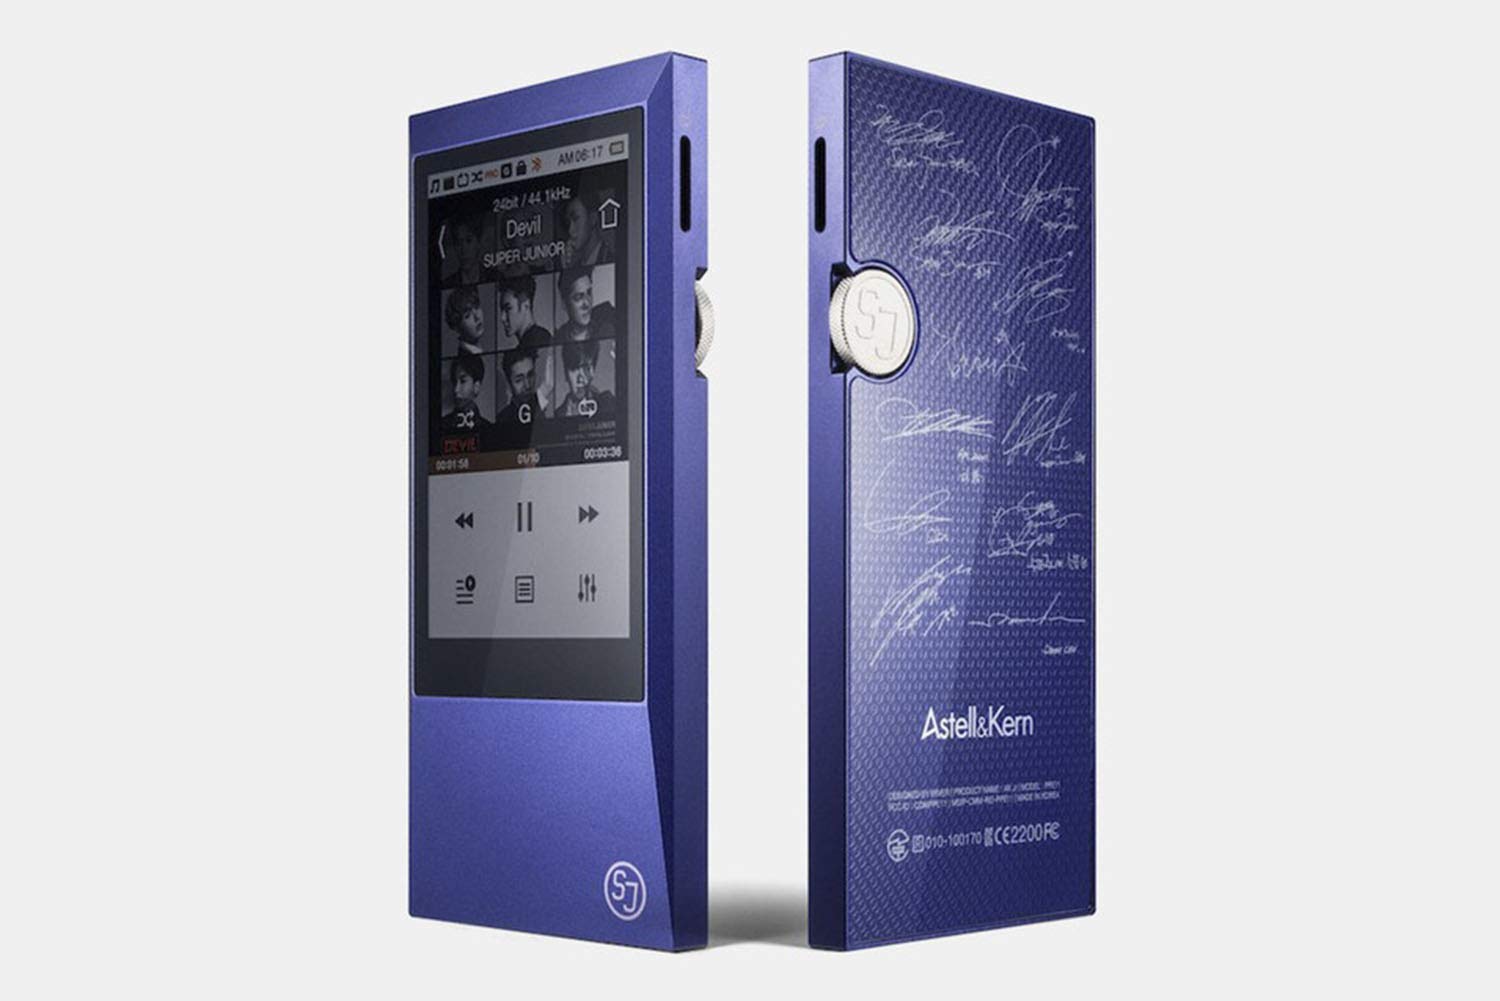 Astell&Kern PPE11(AK Jr) Super Junior Edition Super Junior x AK Jr Limited Edition High Resolution Portable Audio Player - image 1 of 2